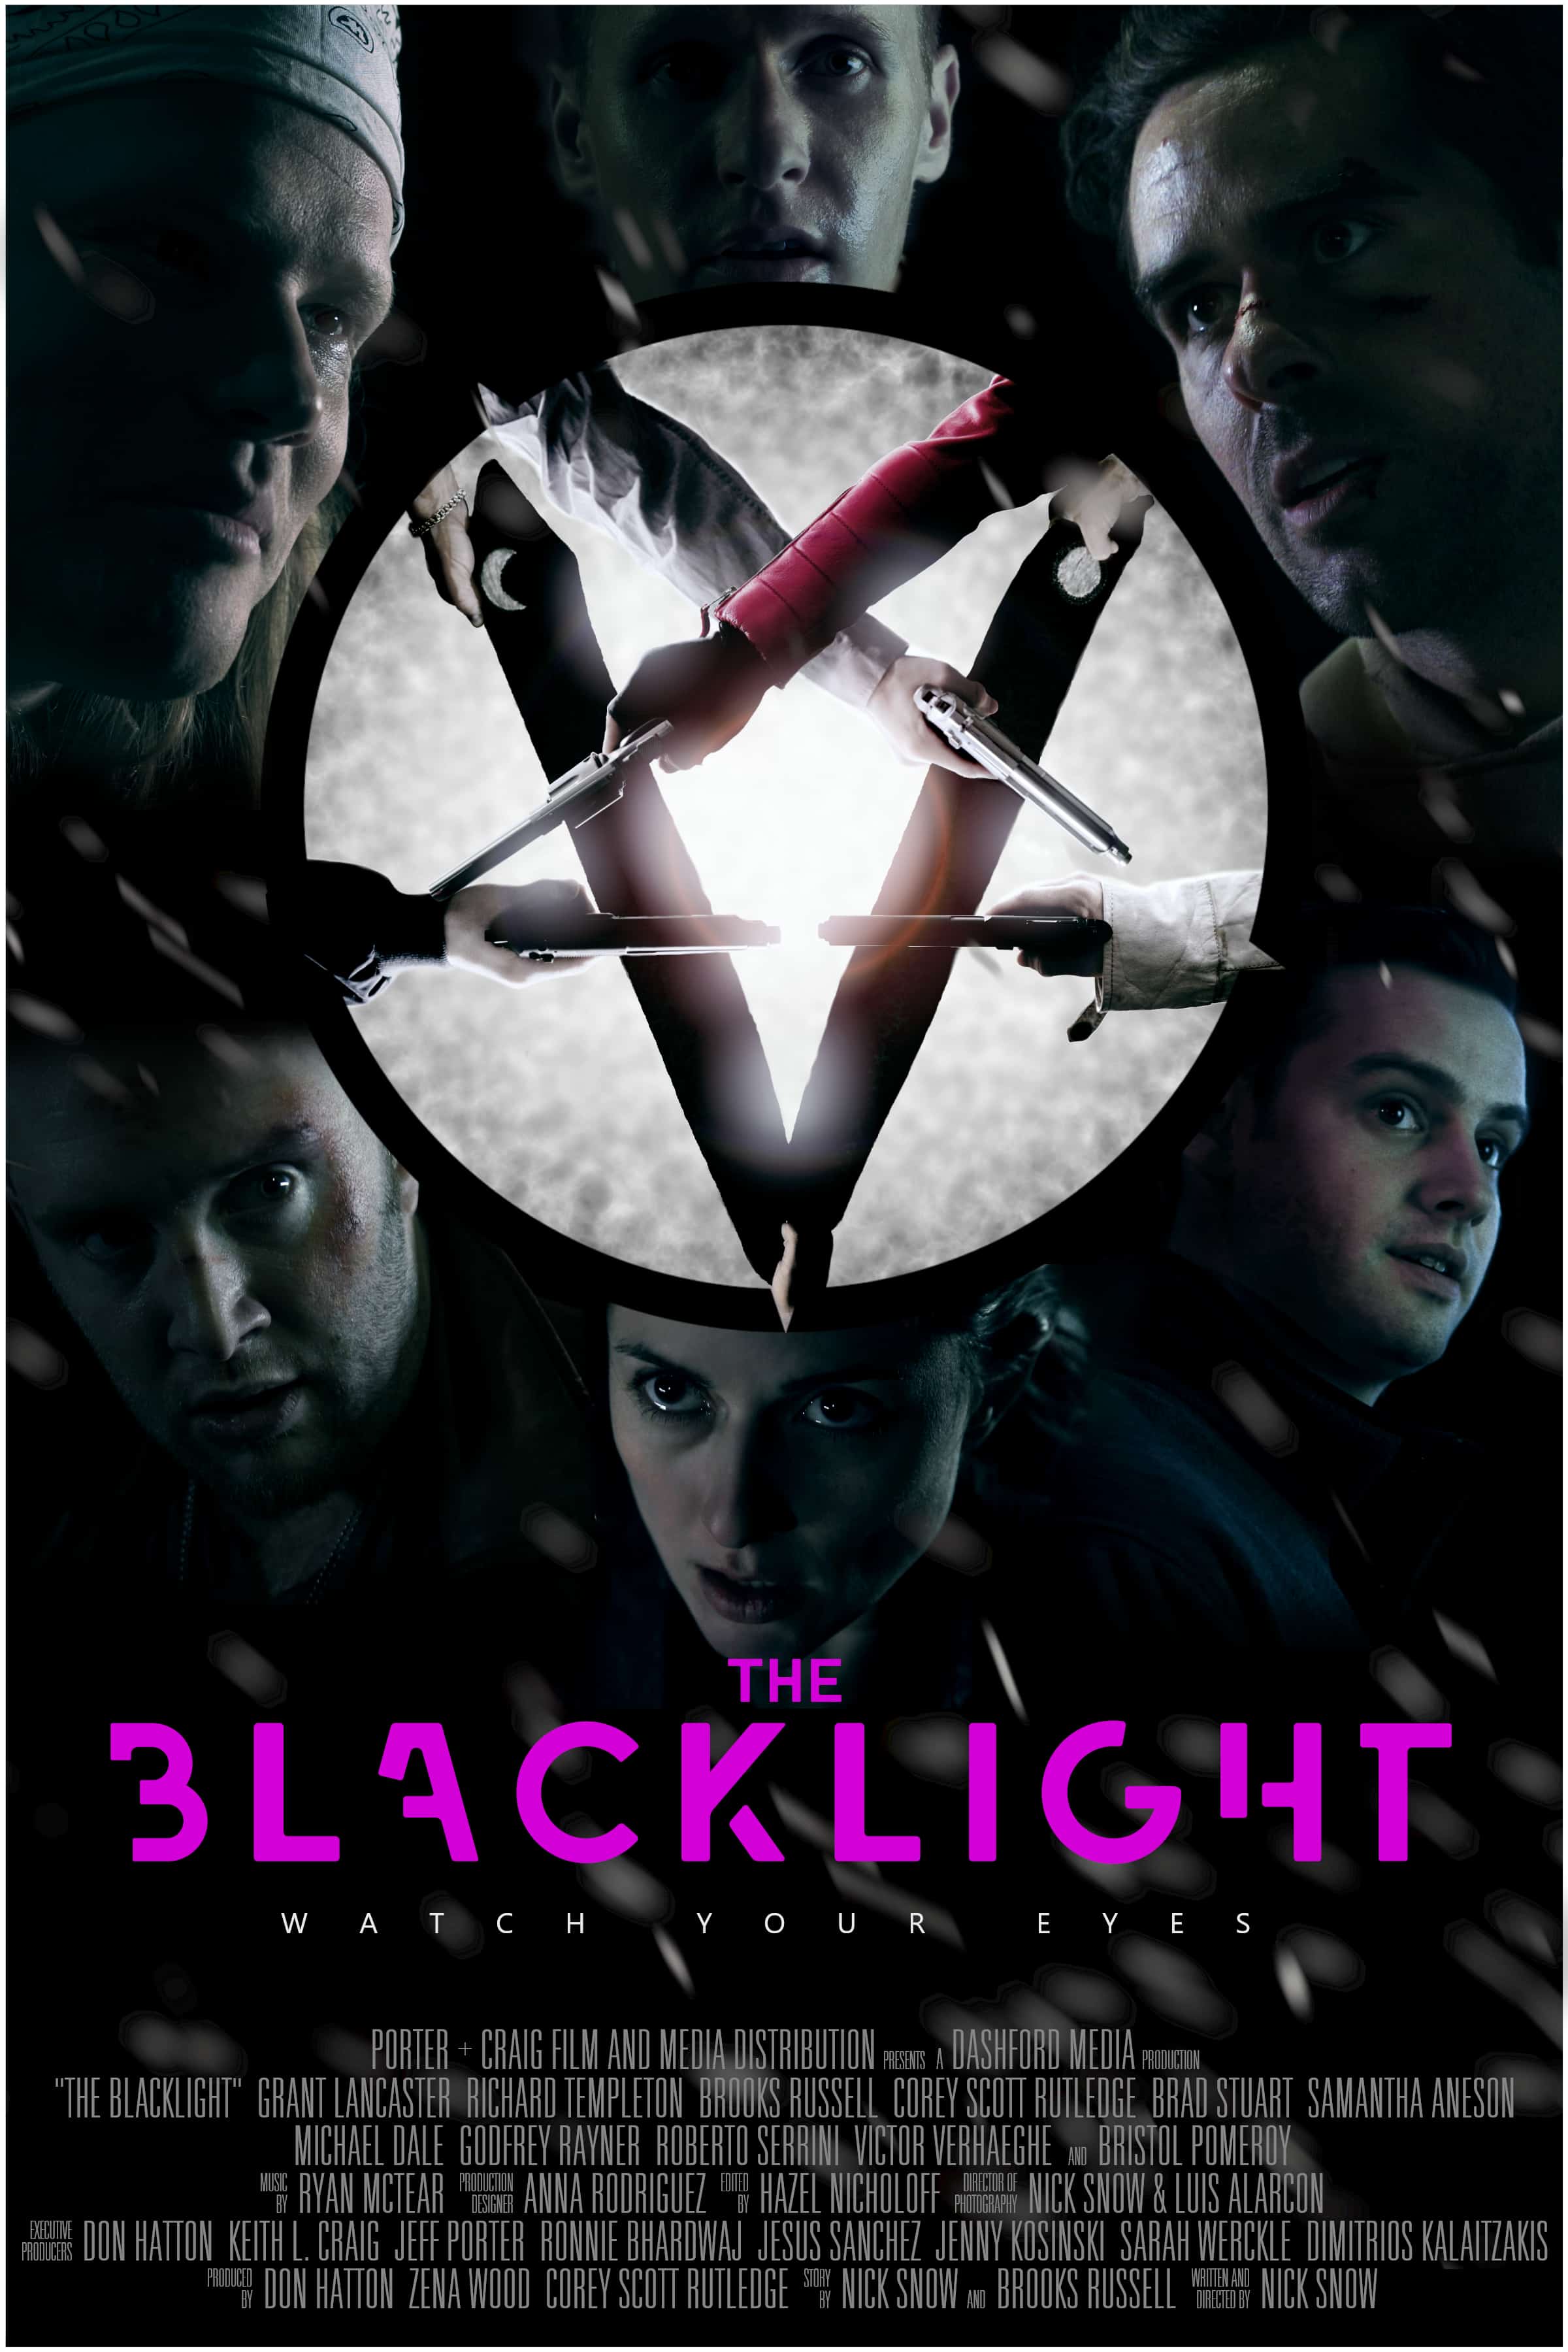 Introducing "The Blacklight": A Supernatural Thriller by Dashford Media and Director Nick Snow 28